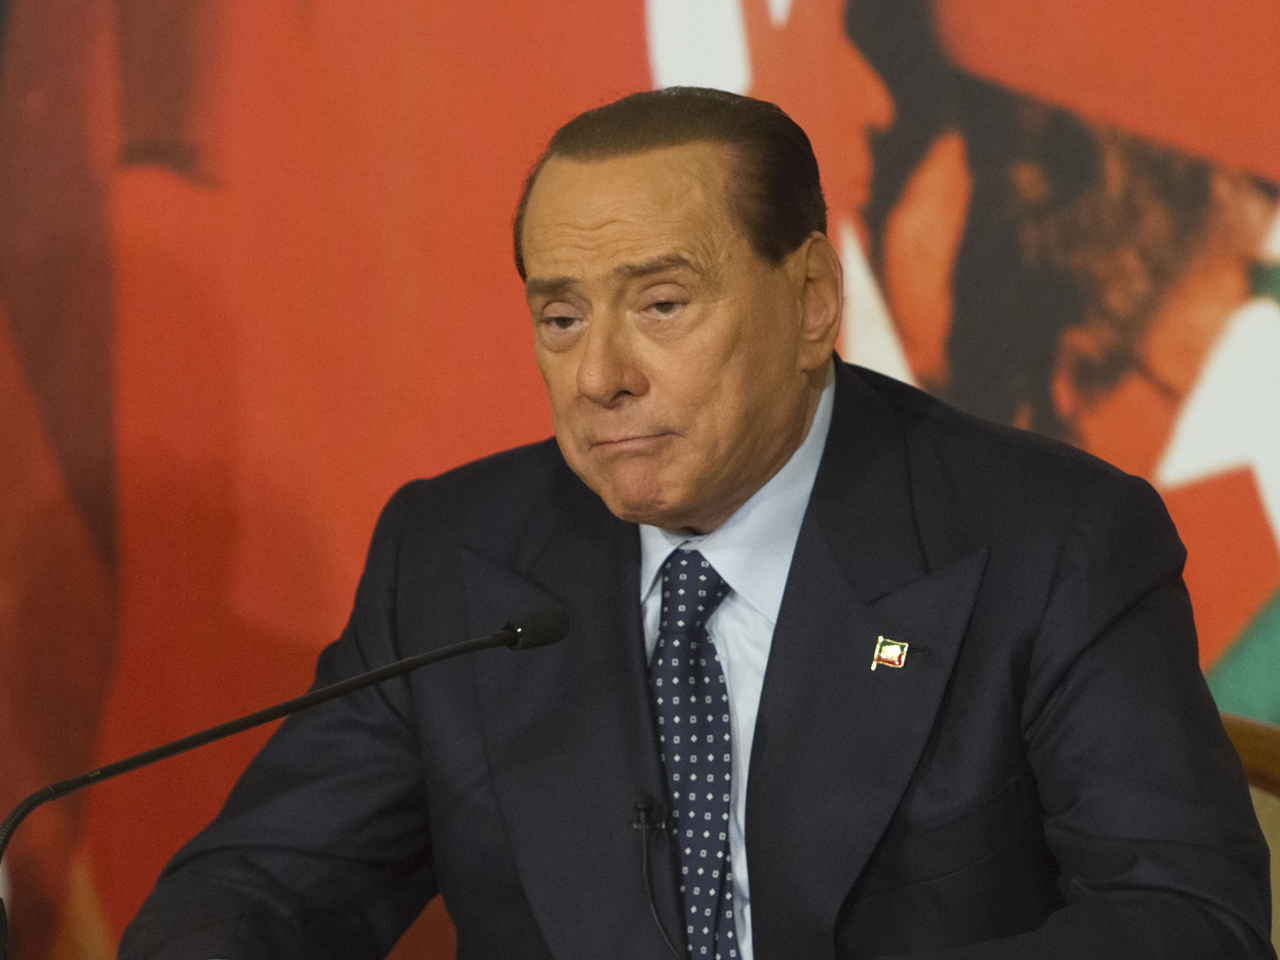 Berlusconi faces vote to oust him permanently from Italy Senate - CBS News